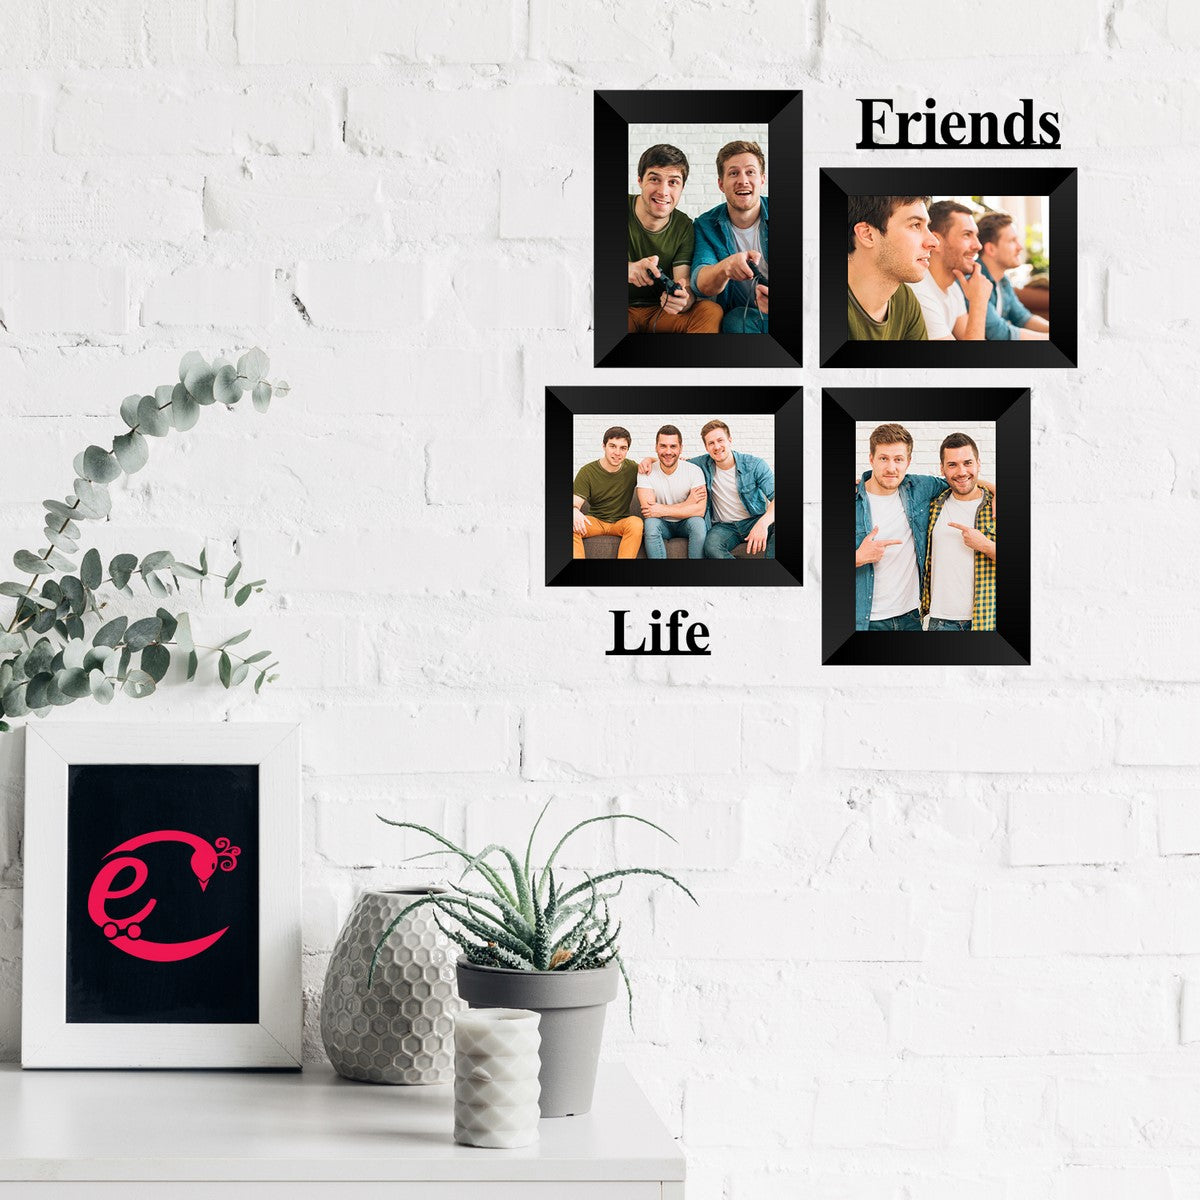 Memory Wall Collage Photo Frame - Set of 4 Photo Frames for 2 Photos of 5"x7", 2 Photos of 4"x6", 1 Piece of FRIENDS, 1 Piece of LIFE 1